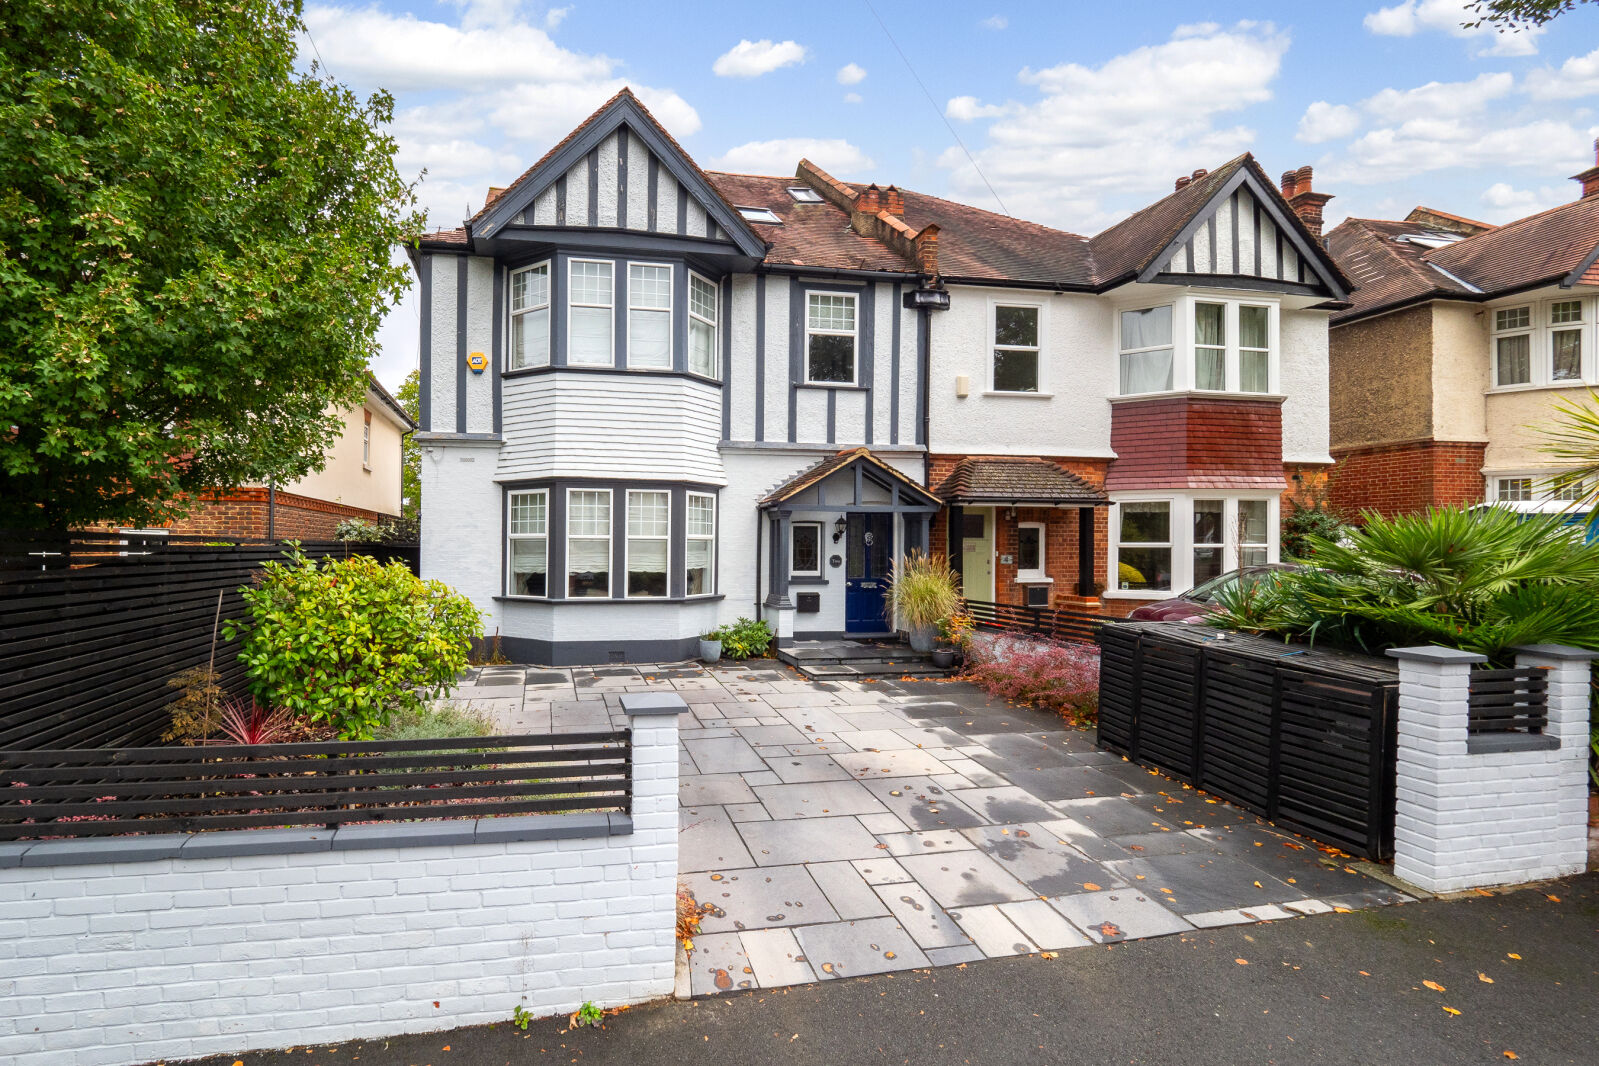 5 bedroom semi detached house for sale Rosebery Road, Cheam, SM1, main image